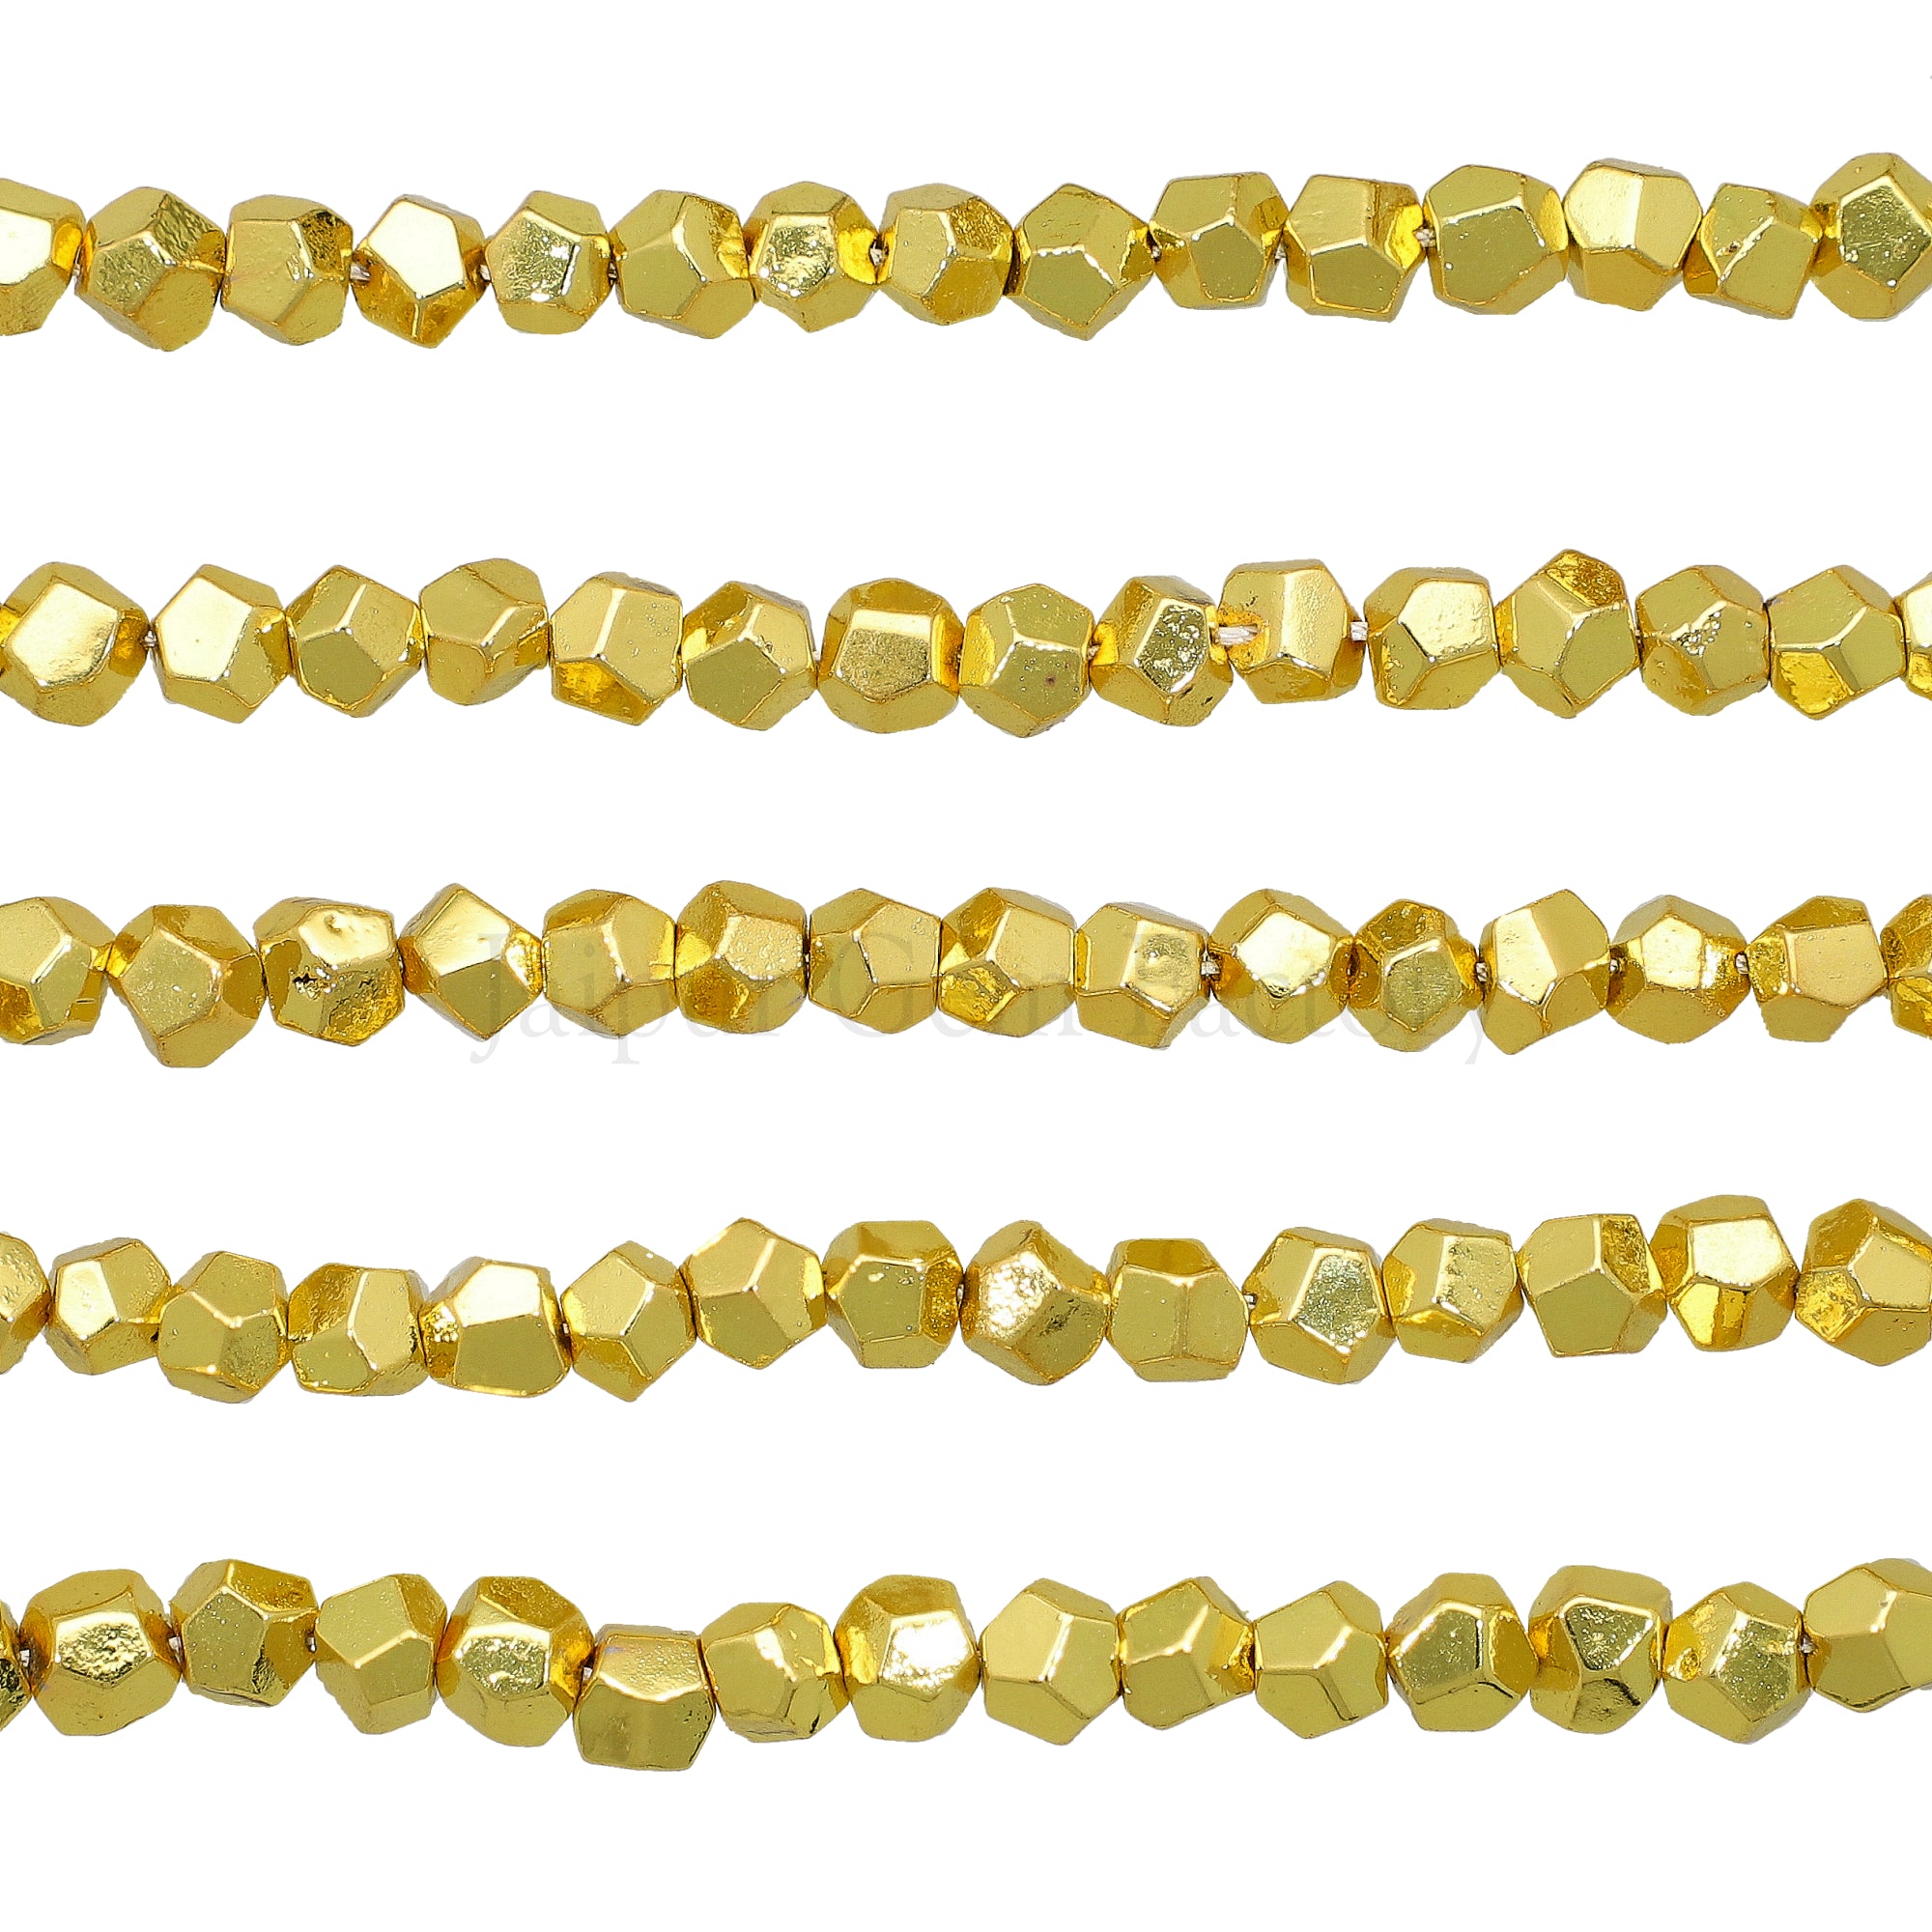 6 To 7 MM Gold Plated Pyrite Faceted Nuggets Beads 16 Inches Strand